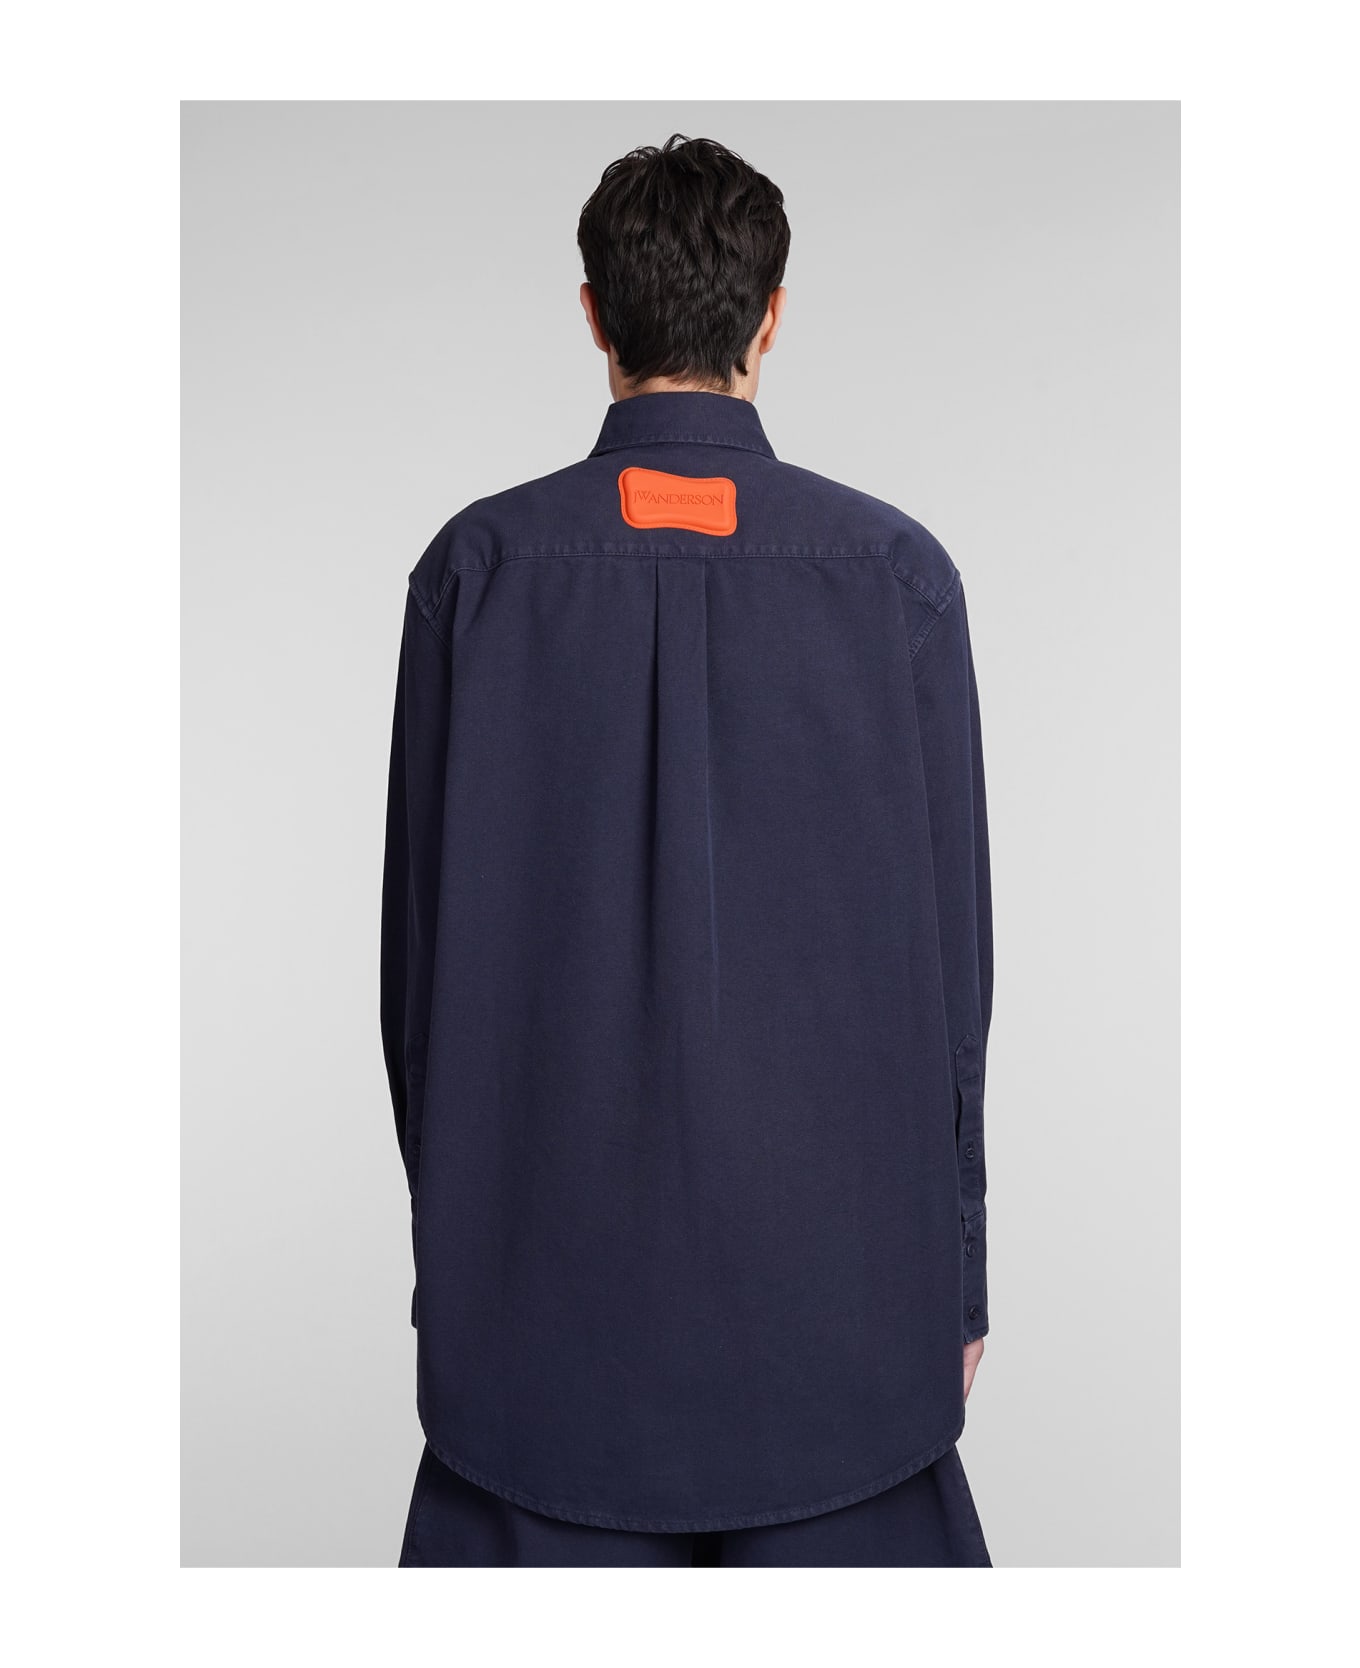 J.W. Anderson Shirt In Blue Cotton - Navy